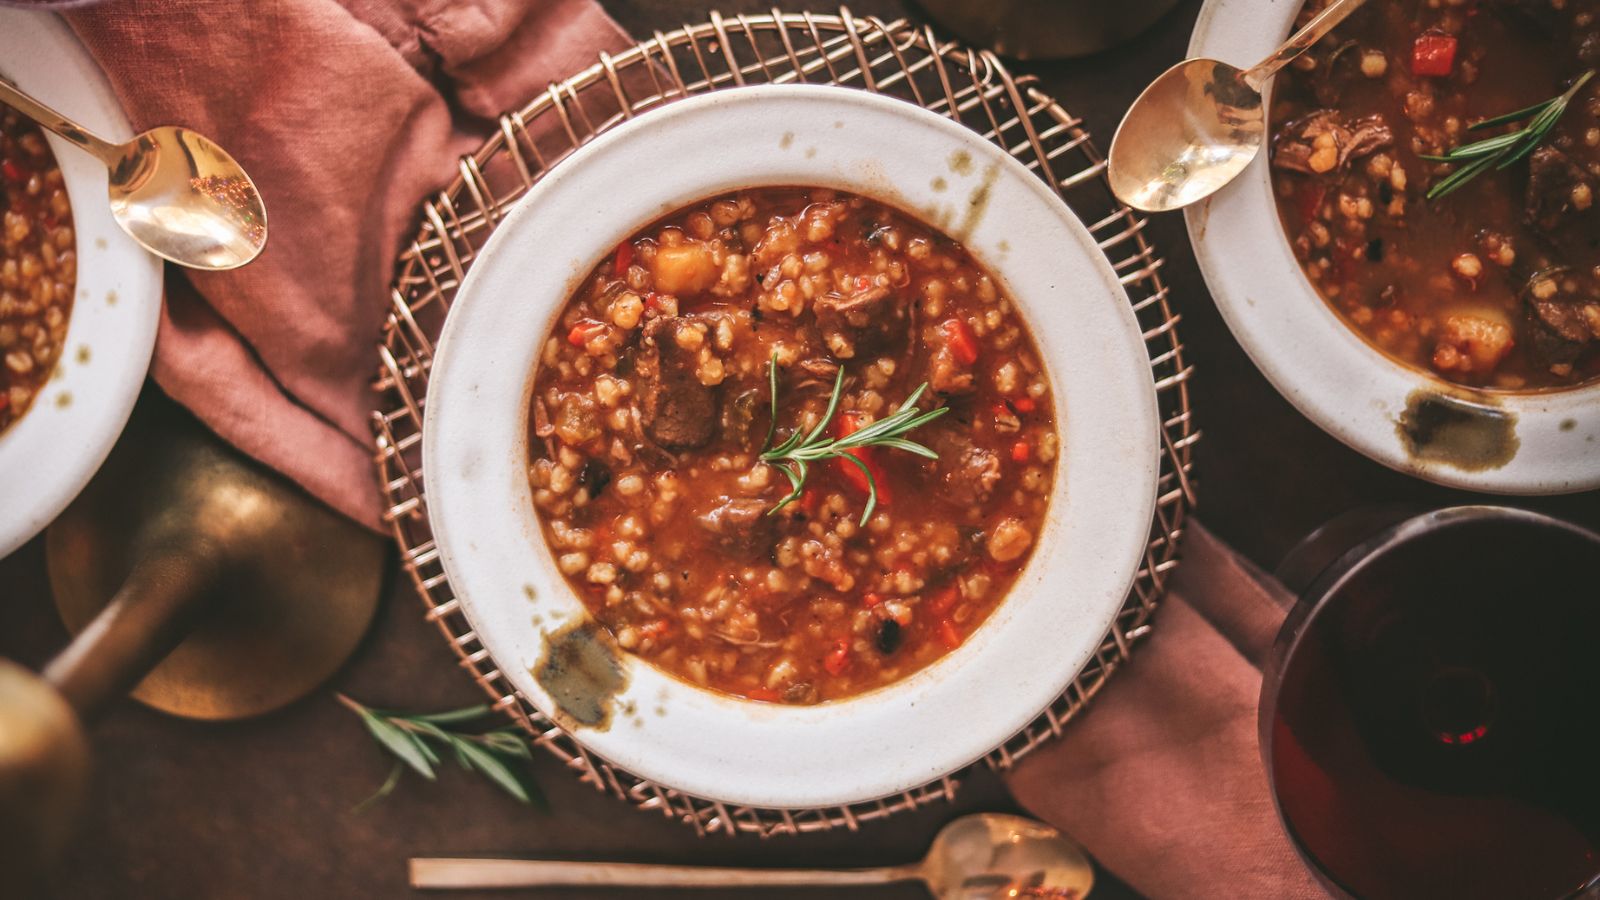  Beef and barley soup with napkins and red wine. 